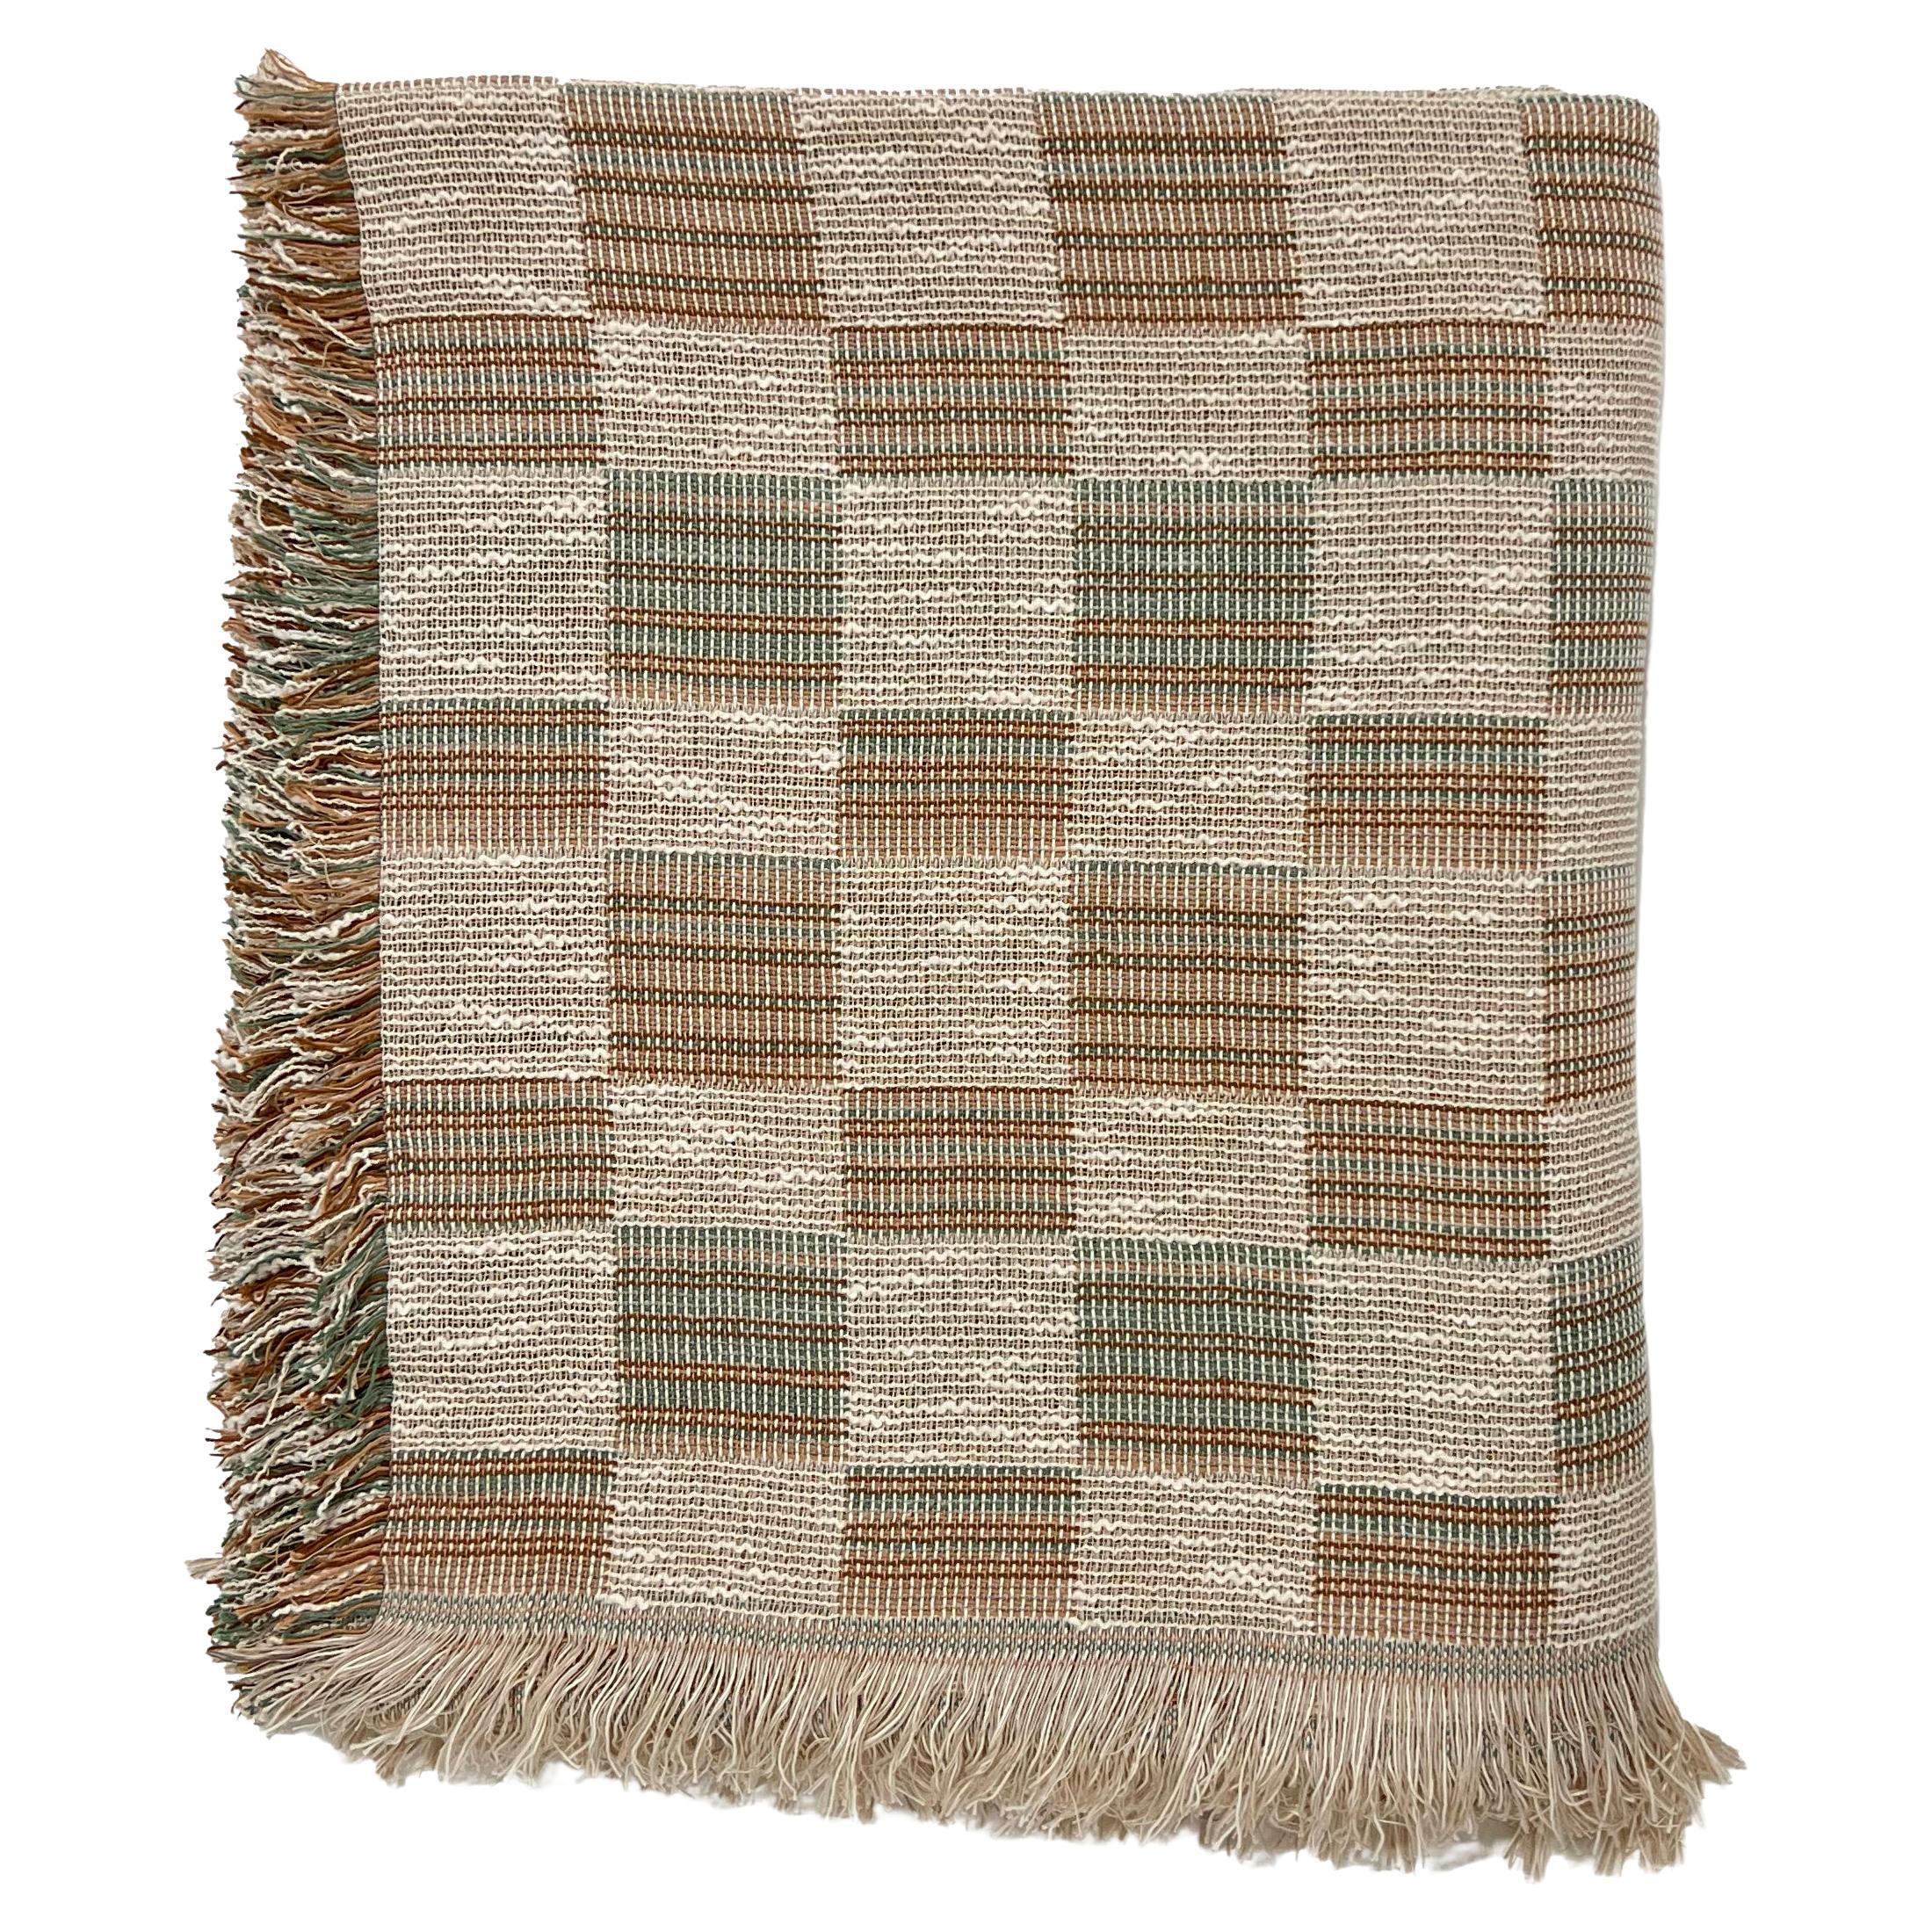 Patterned Woven Cotton Throw Blanket by Folk Textiles (Mariana / Sea) For Sale